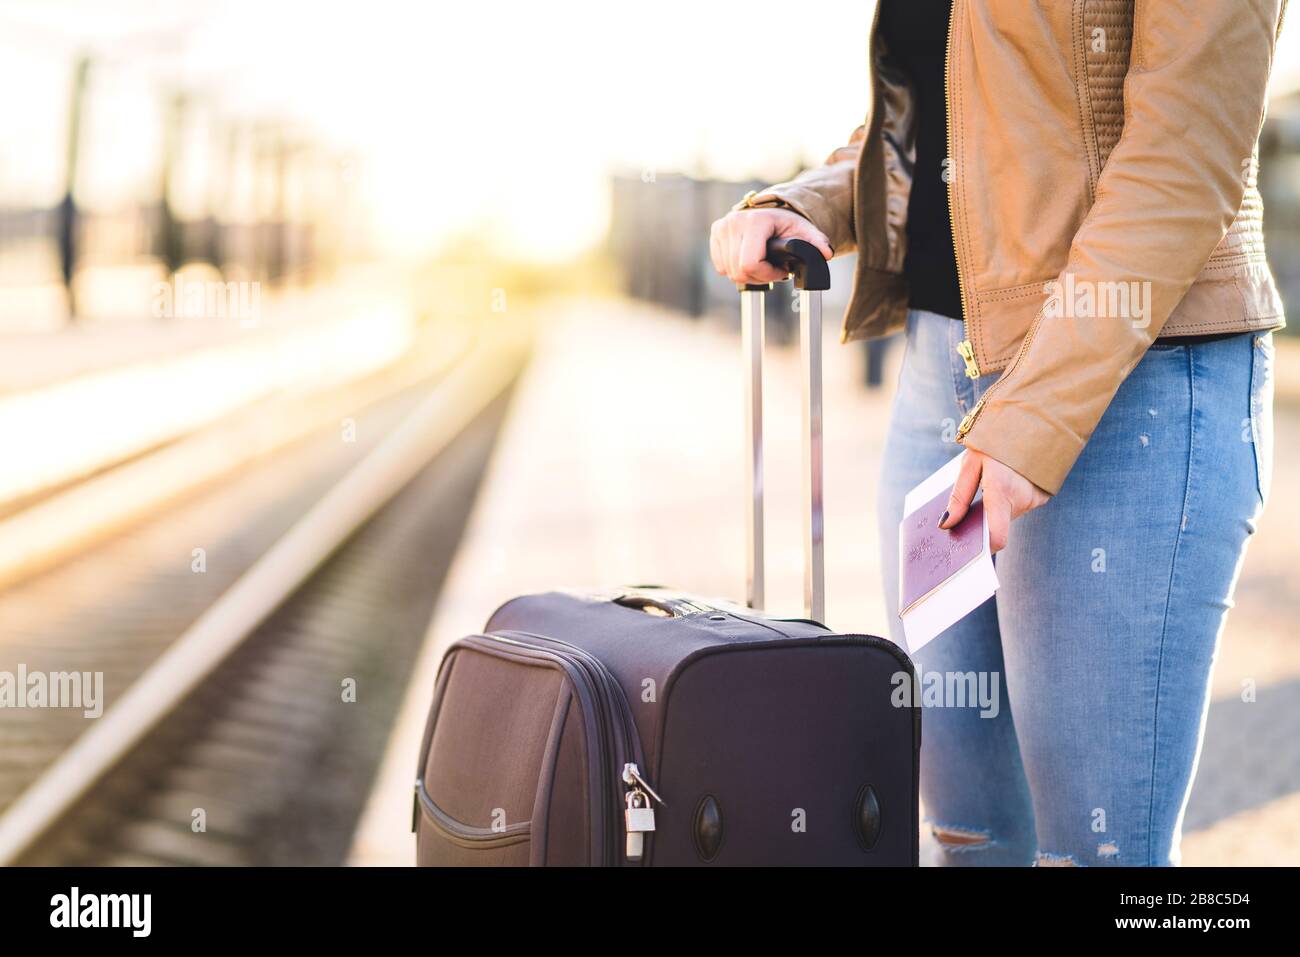 Woman waiting for train with suitcase and luggage. Lady holding ticket and passport in hand in platform. Tracks in the background. Stock Photo